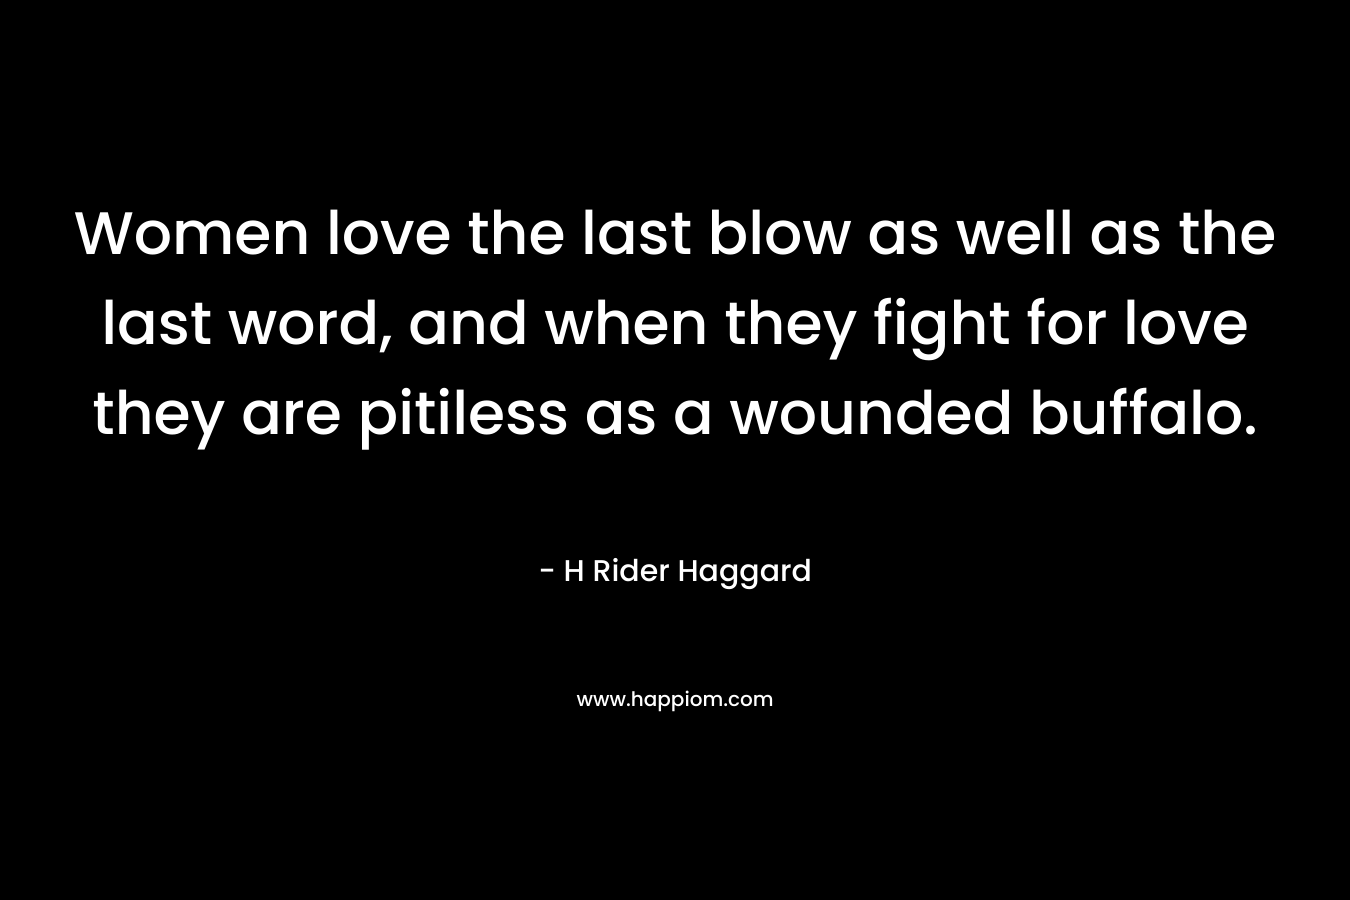 Women love the last blow as well as the last word, and when they fight for love they are pitiless as a wounded buffalo. – H Rider Haggard